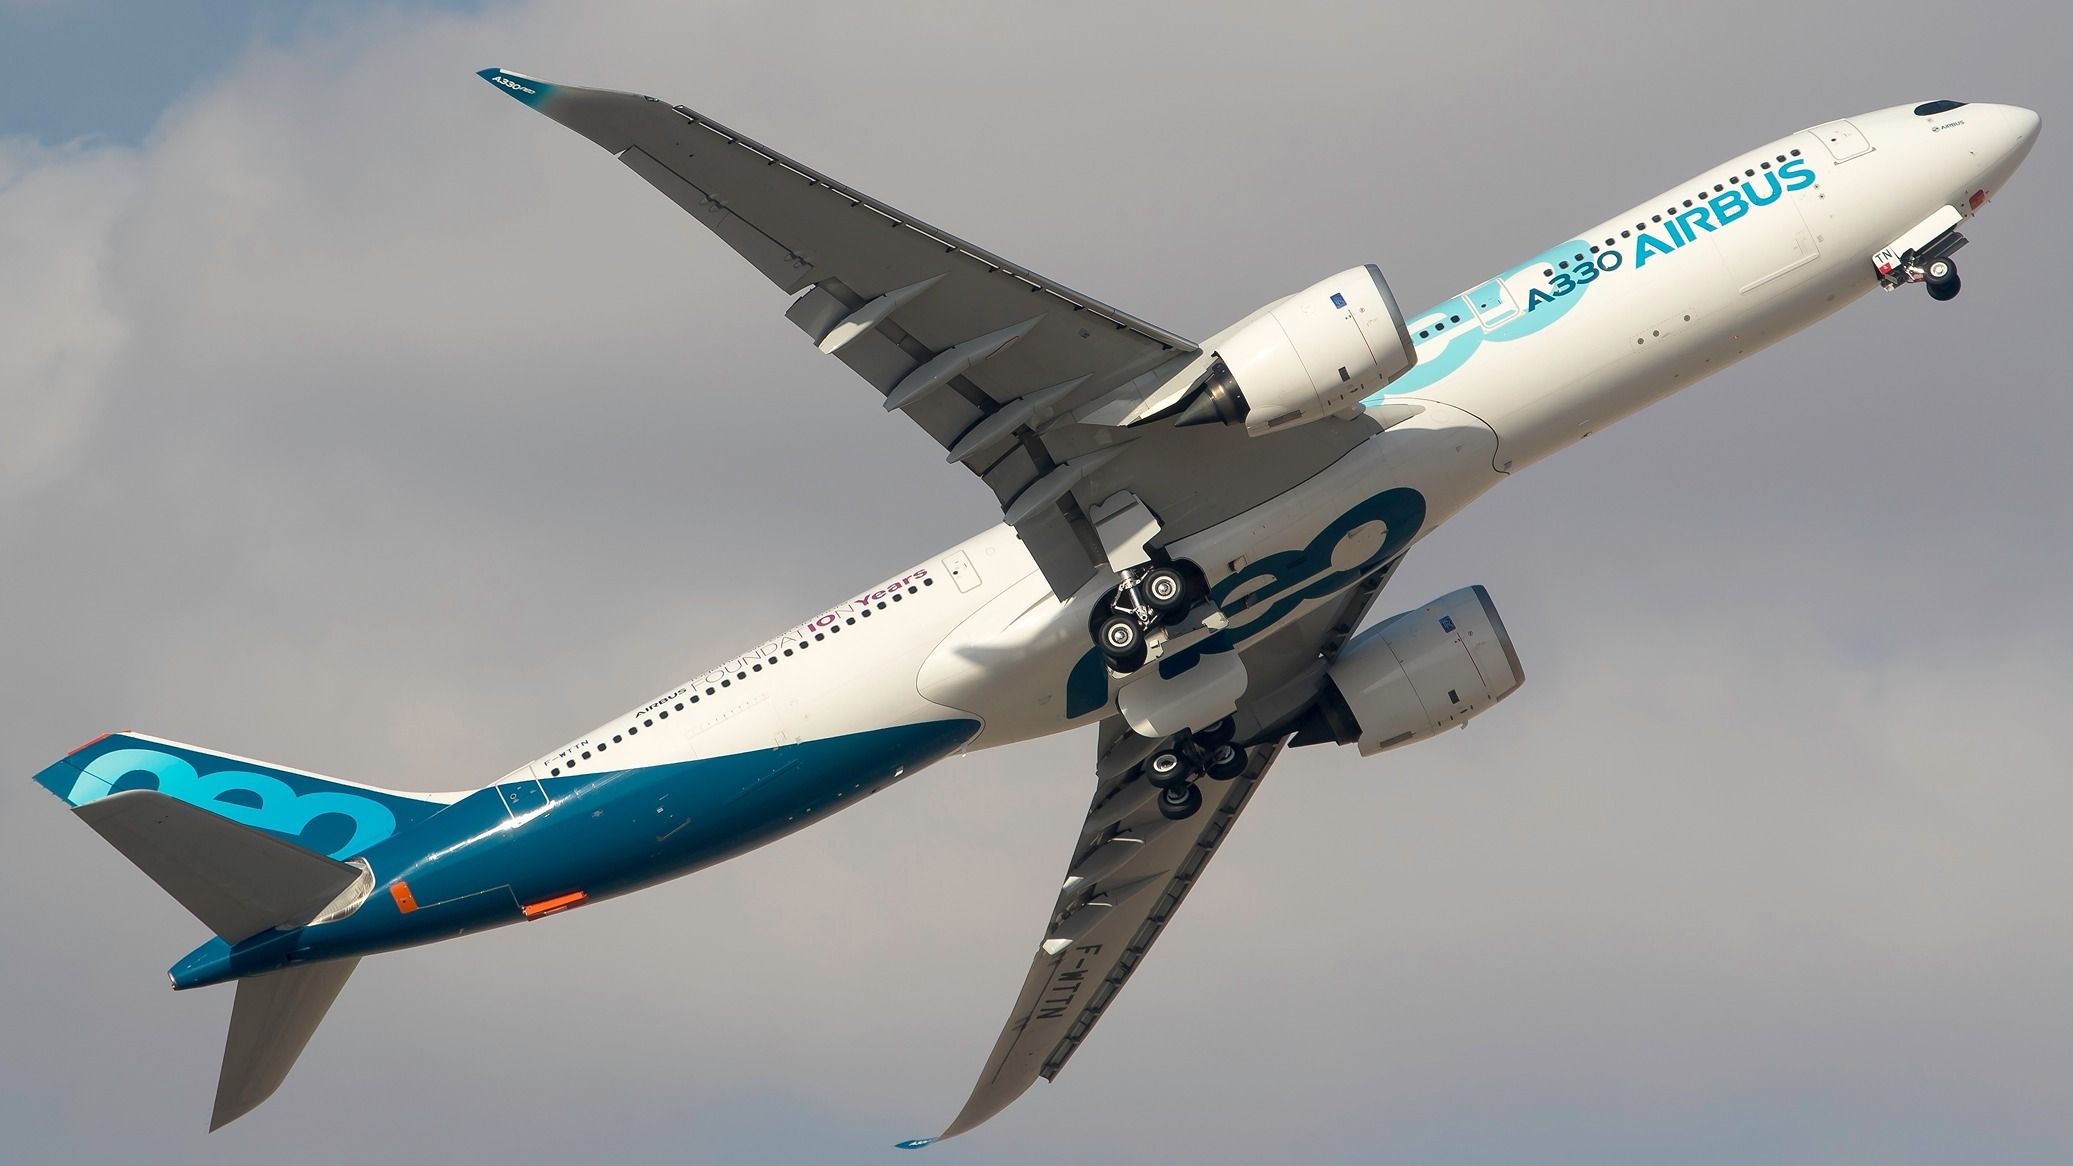 Airbus A330neo performing a fly-by over Dubai shutterstock_2287086765